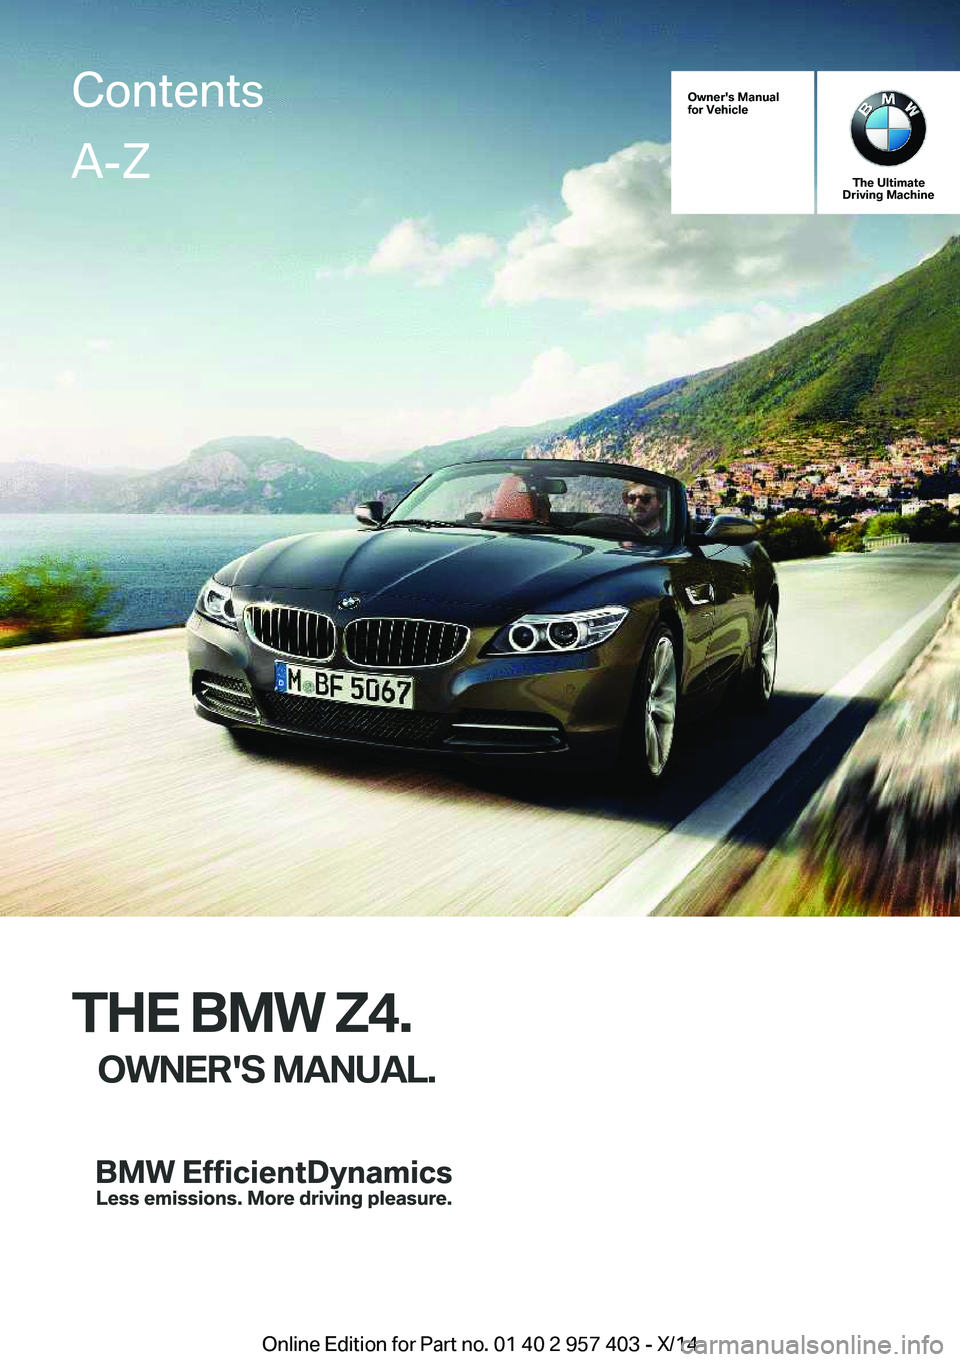 BMW Z4 SDRIVE35I 2016  Owners Manual Owner's Manual
for Vehicle
The Ultimate
Driving Machine
THE BMW Z4.
OWNER'S MANUAL.
ContentsA-Z
Online Edition for Part no. 01 40 2 957 403 - X/14   